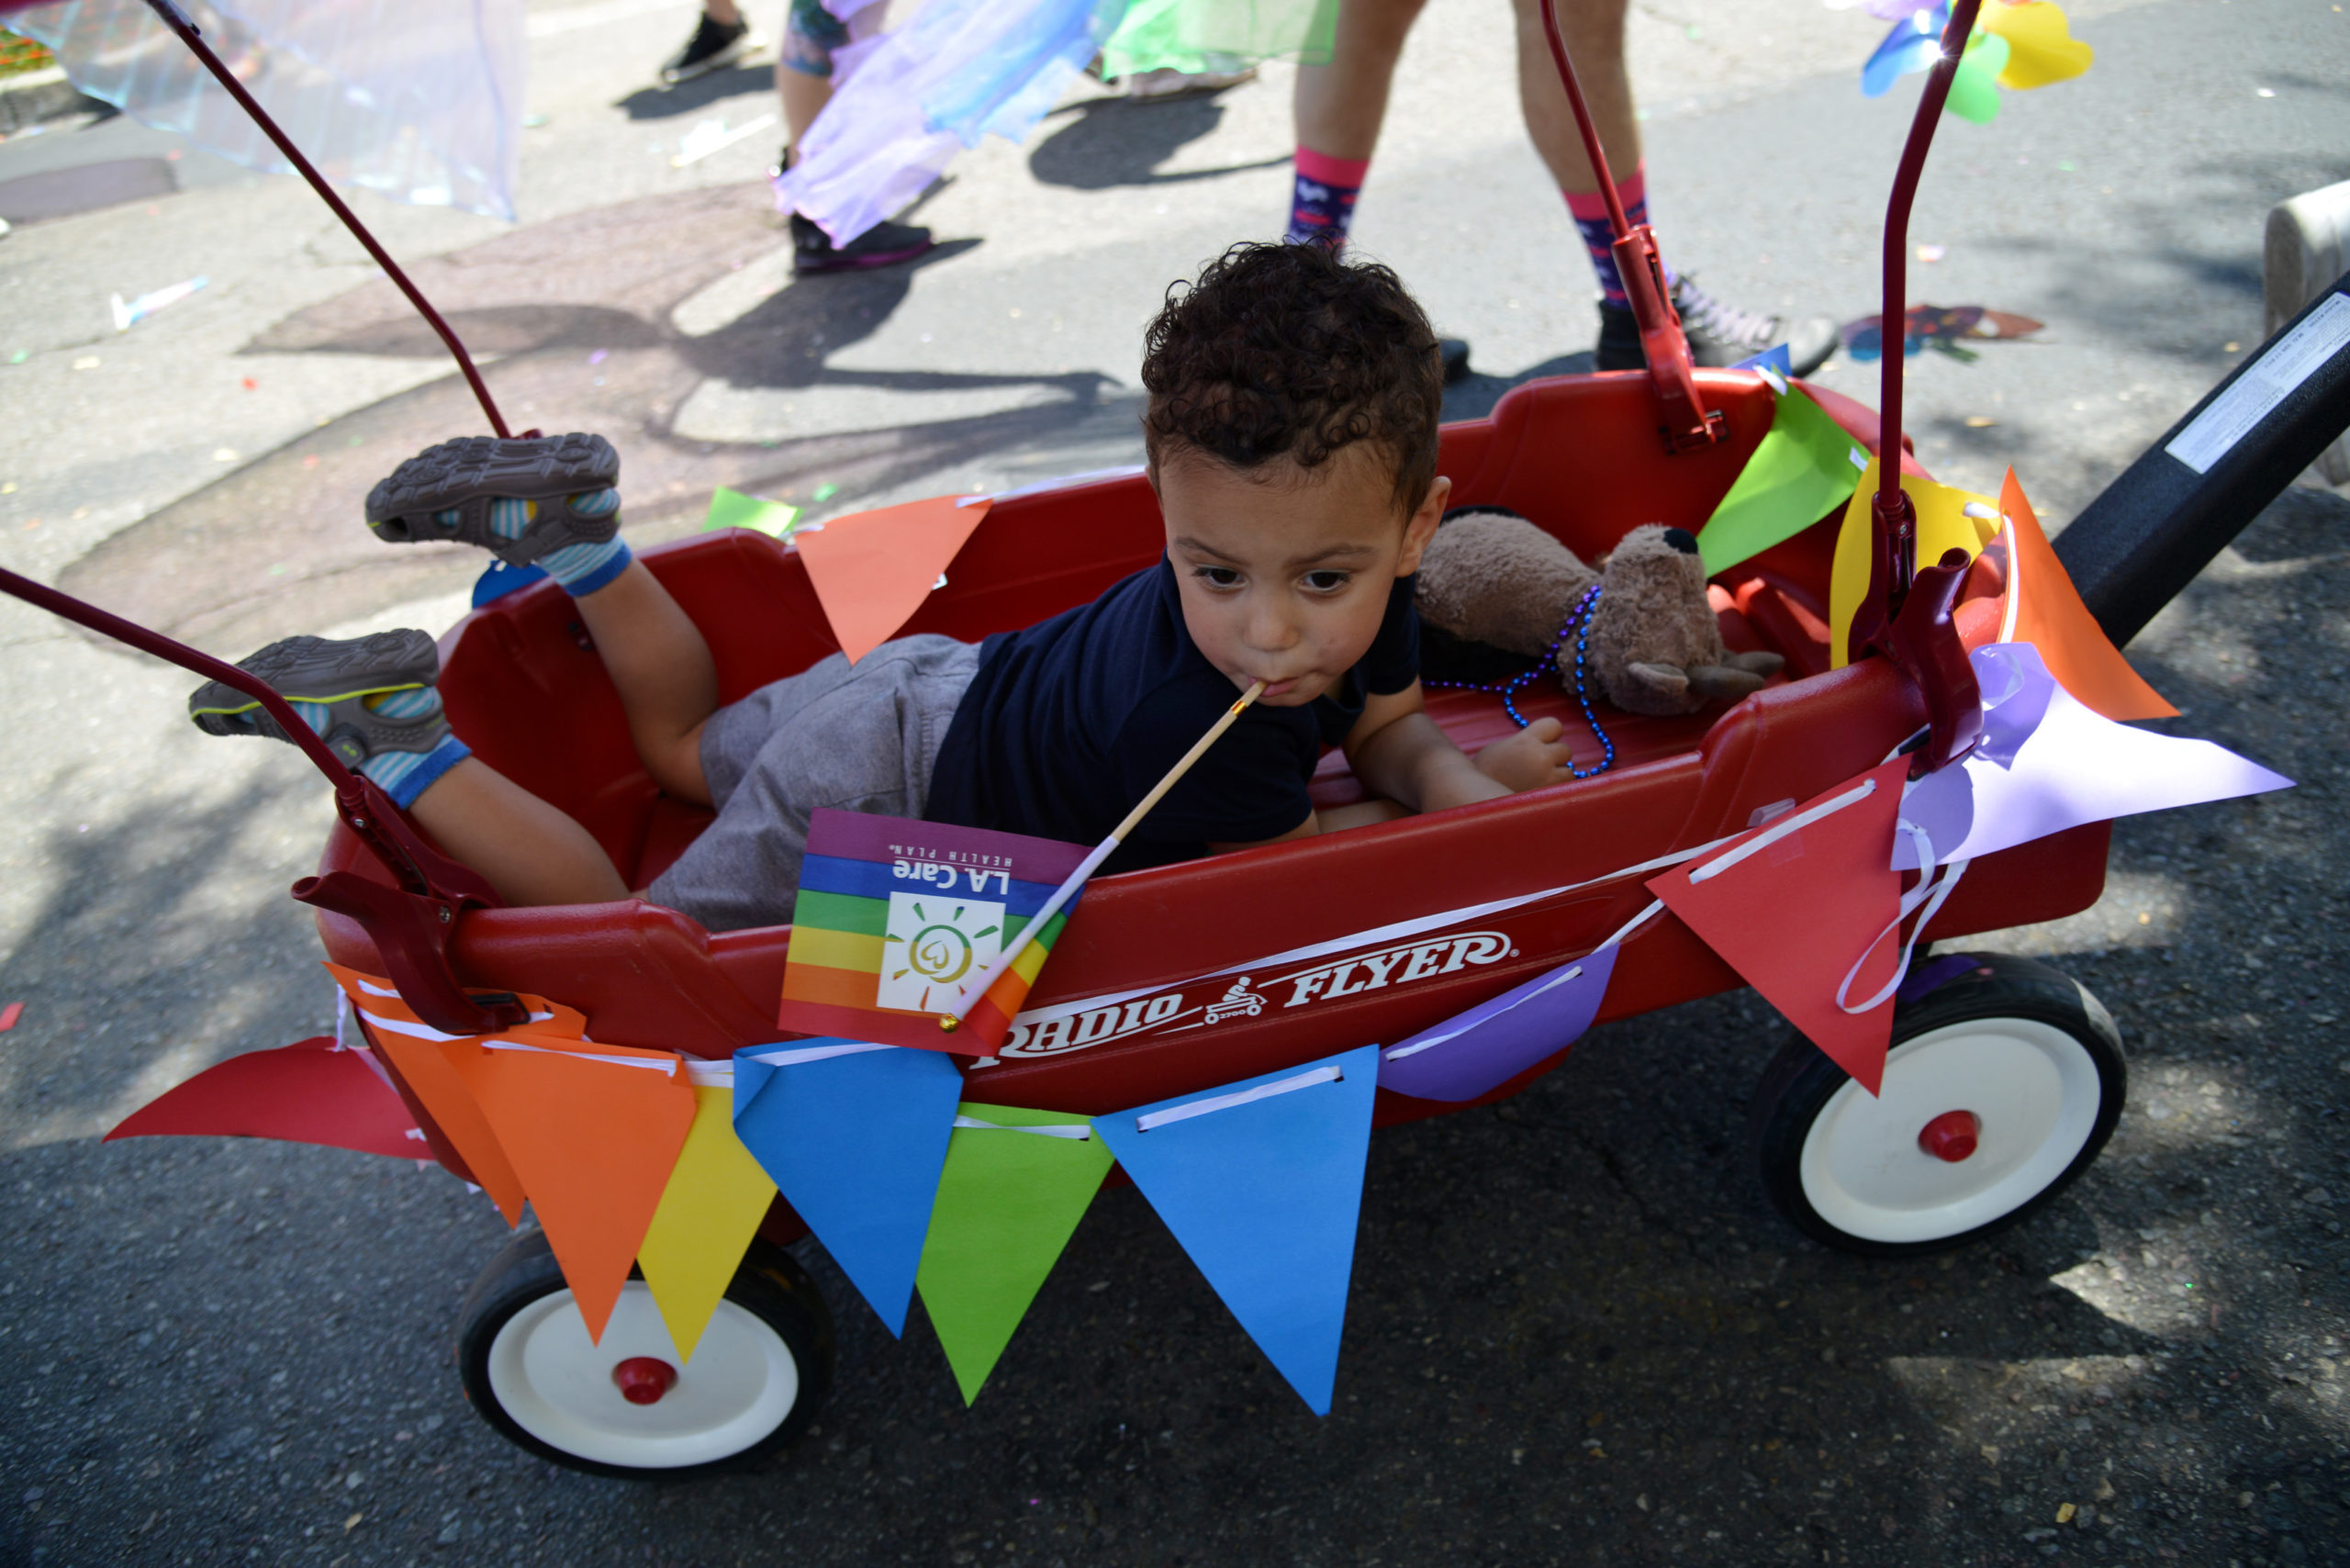 A child is seen at the LA Pride Parade on June 09, 2019 in West Hollywood, California. (Photo by Chelsea Guglielmino/Getty Images)